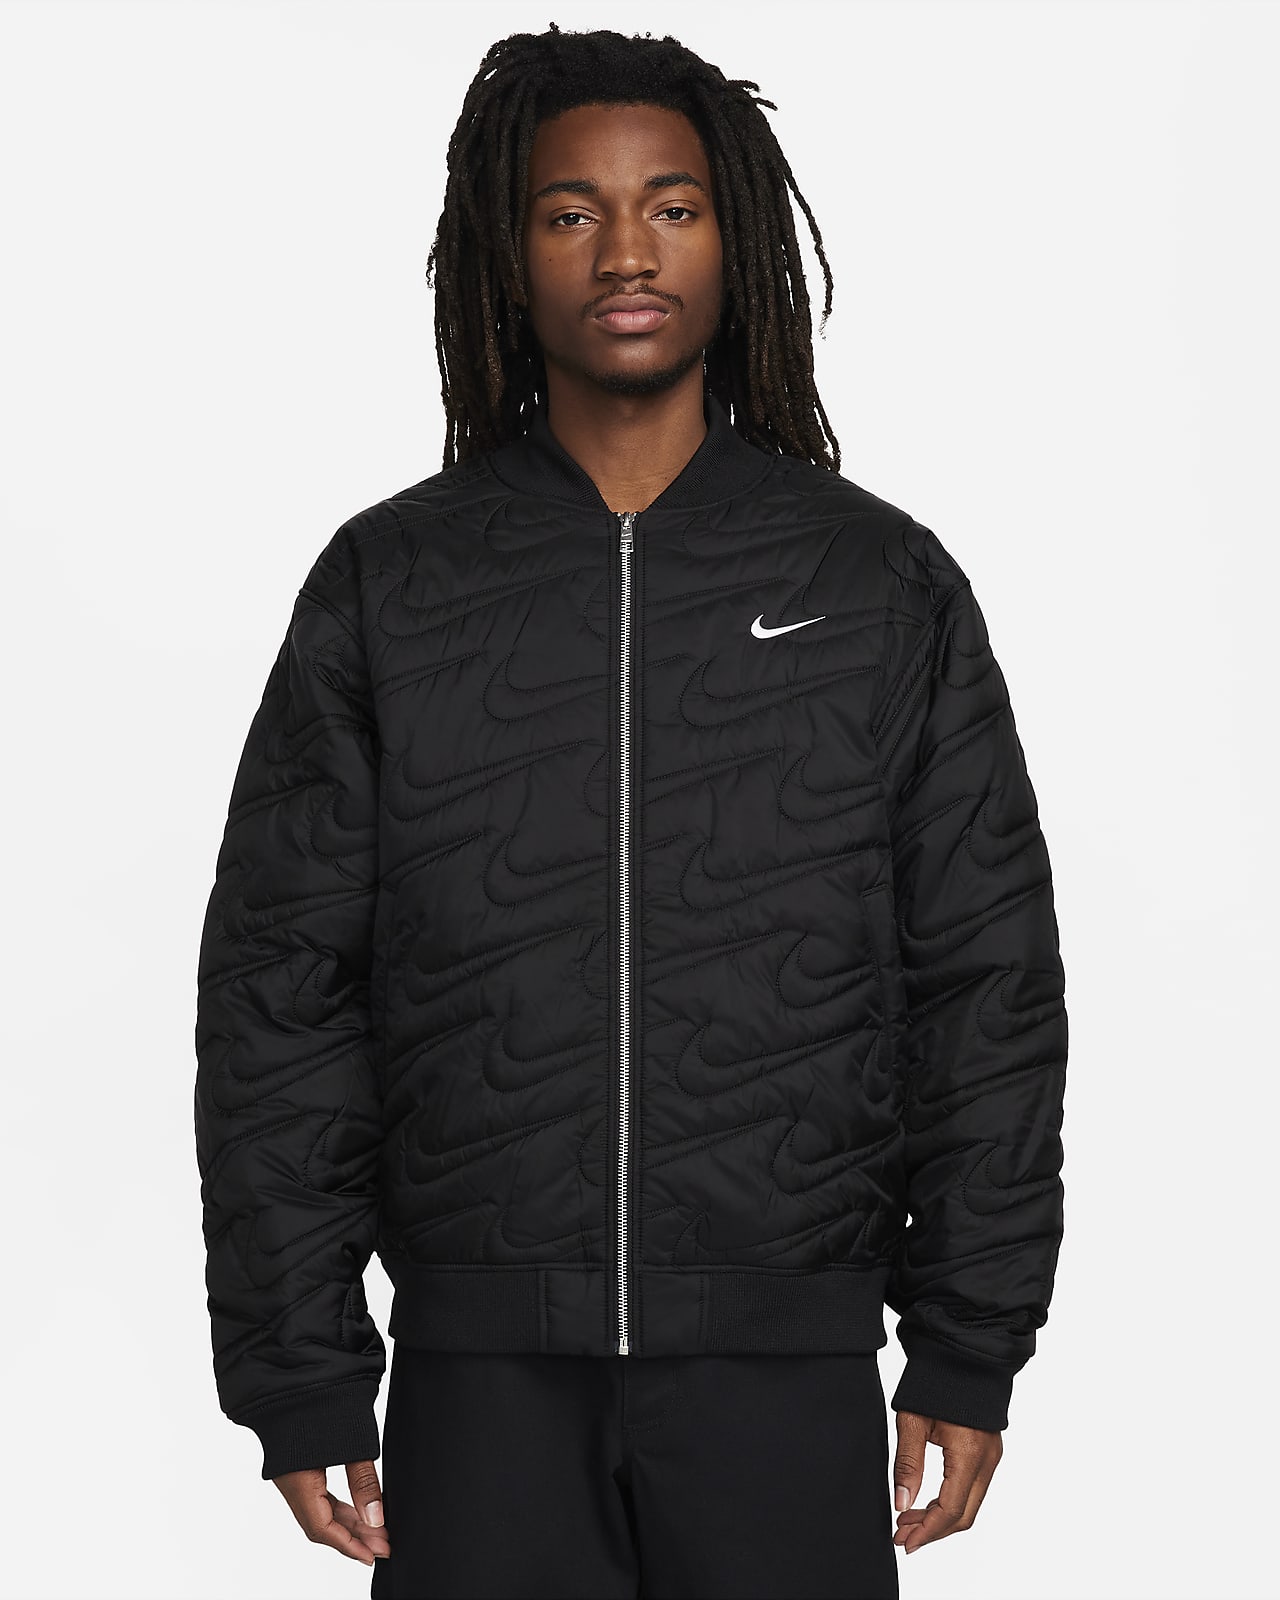 Nike Blue Polyester Terry Jacket - Buy Nike Blue Polyester Terry Jacket  Online at Best Prices in India on Snapdeal